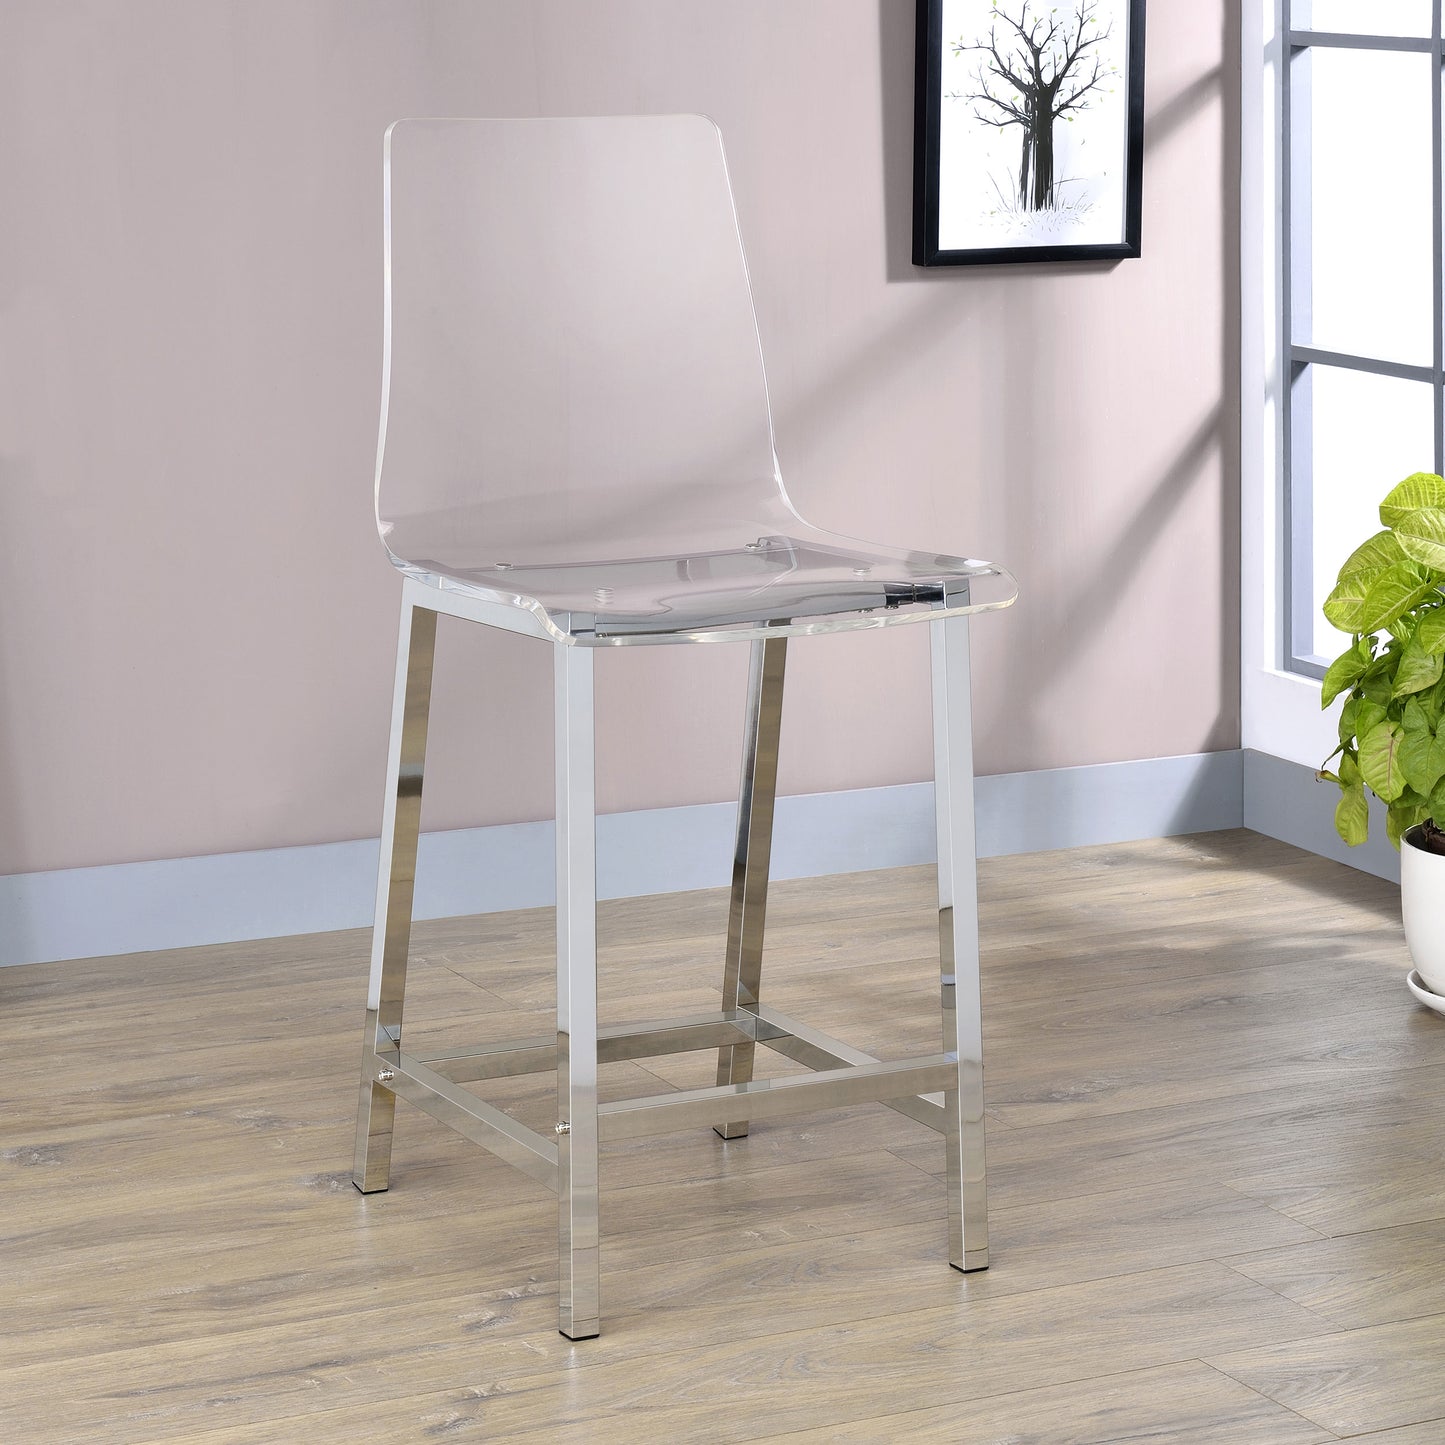 Juelia Counter Height Stools Chrome and Clear Acrylic (Set of 2)